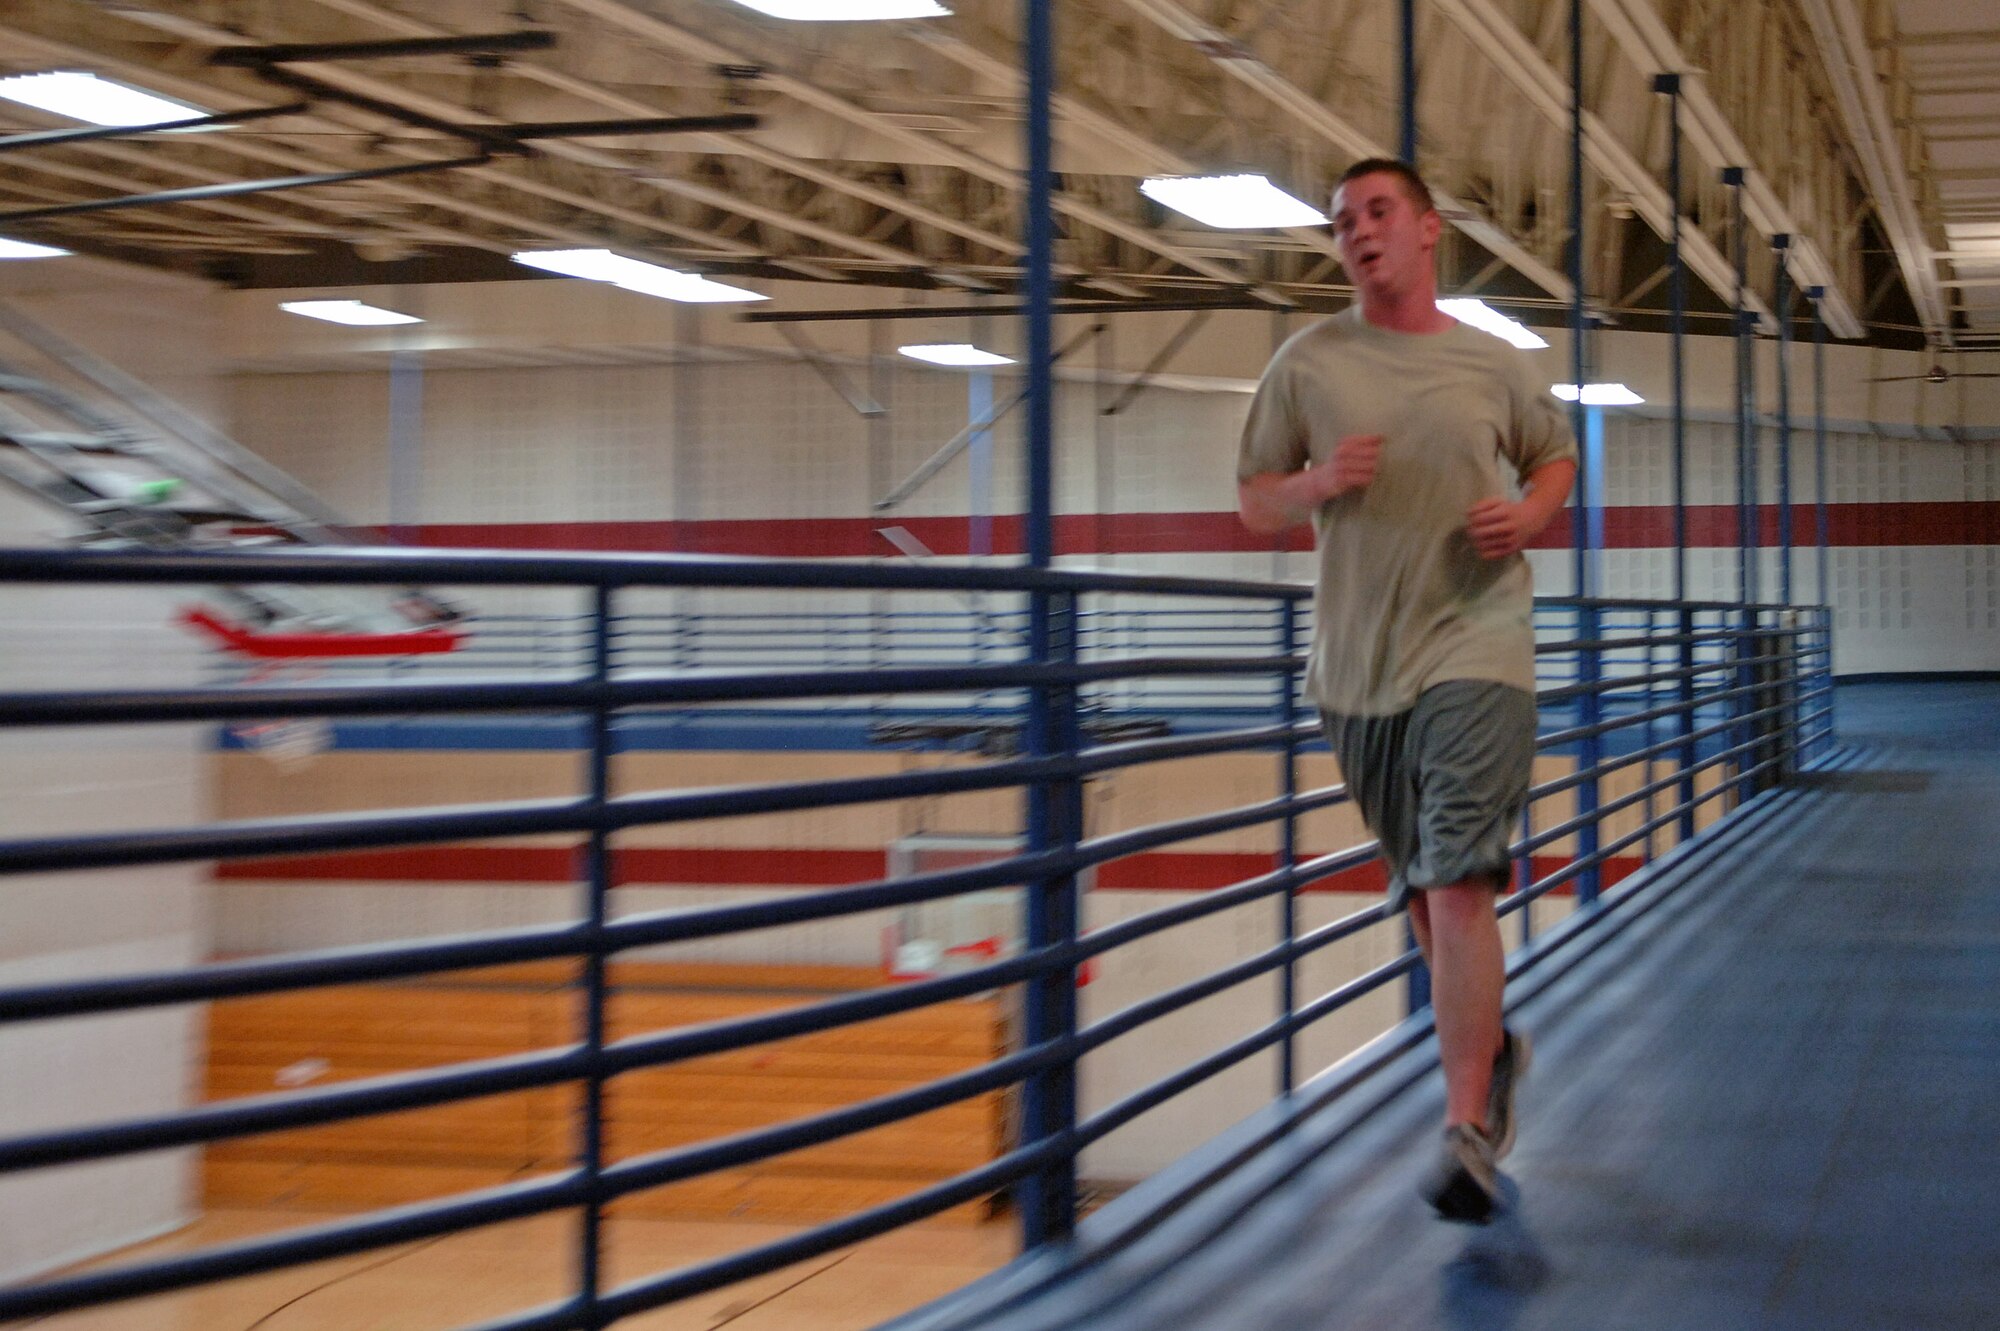 ELLSWORTH AIR FORCE BASE, S.D. – Airman 1st Class Jody Harding, 28th Maintenance Squadron trailer maintenance specialist, runs around the indoor track at the Bellamy Fitness Center during a mid-day workout, June 22. With the July 1 implementation of the new Air Force physical training standards less than a week away, Airmen on base have begun training to meet and exceed the requirements. (U.S. Air Force photo / Airman 1st Class Jarad A. Denton)